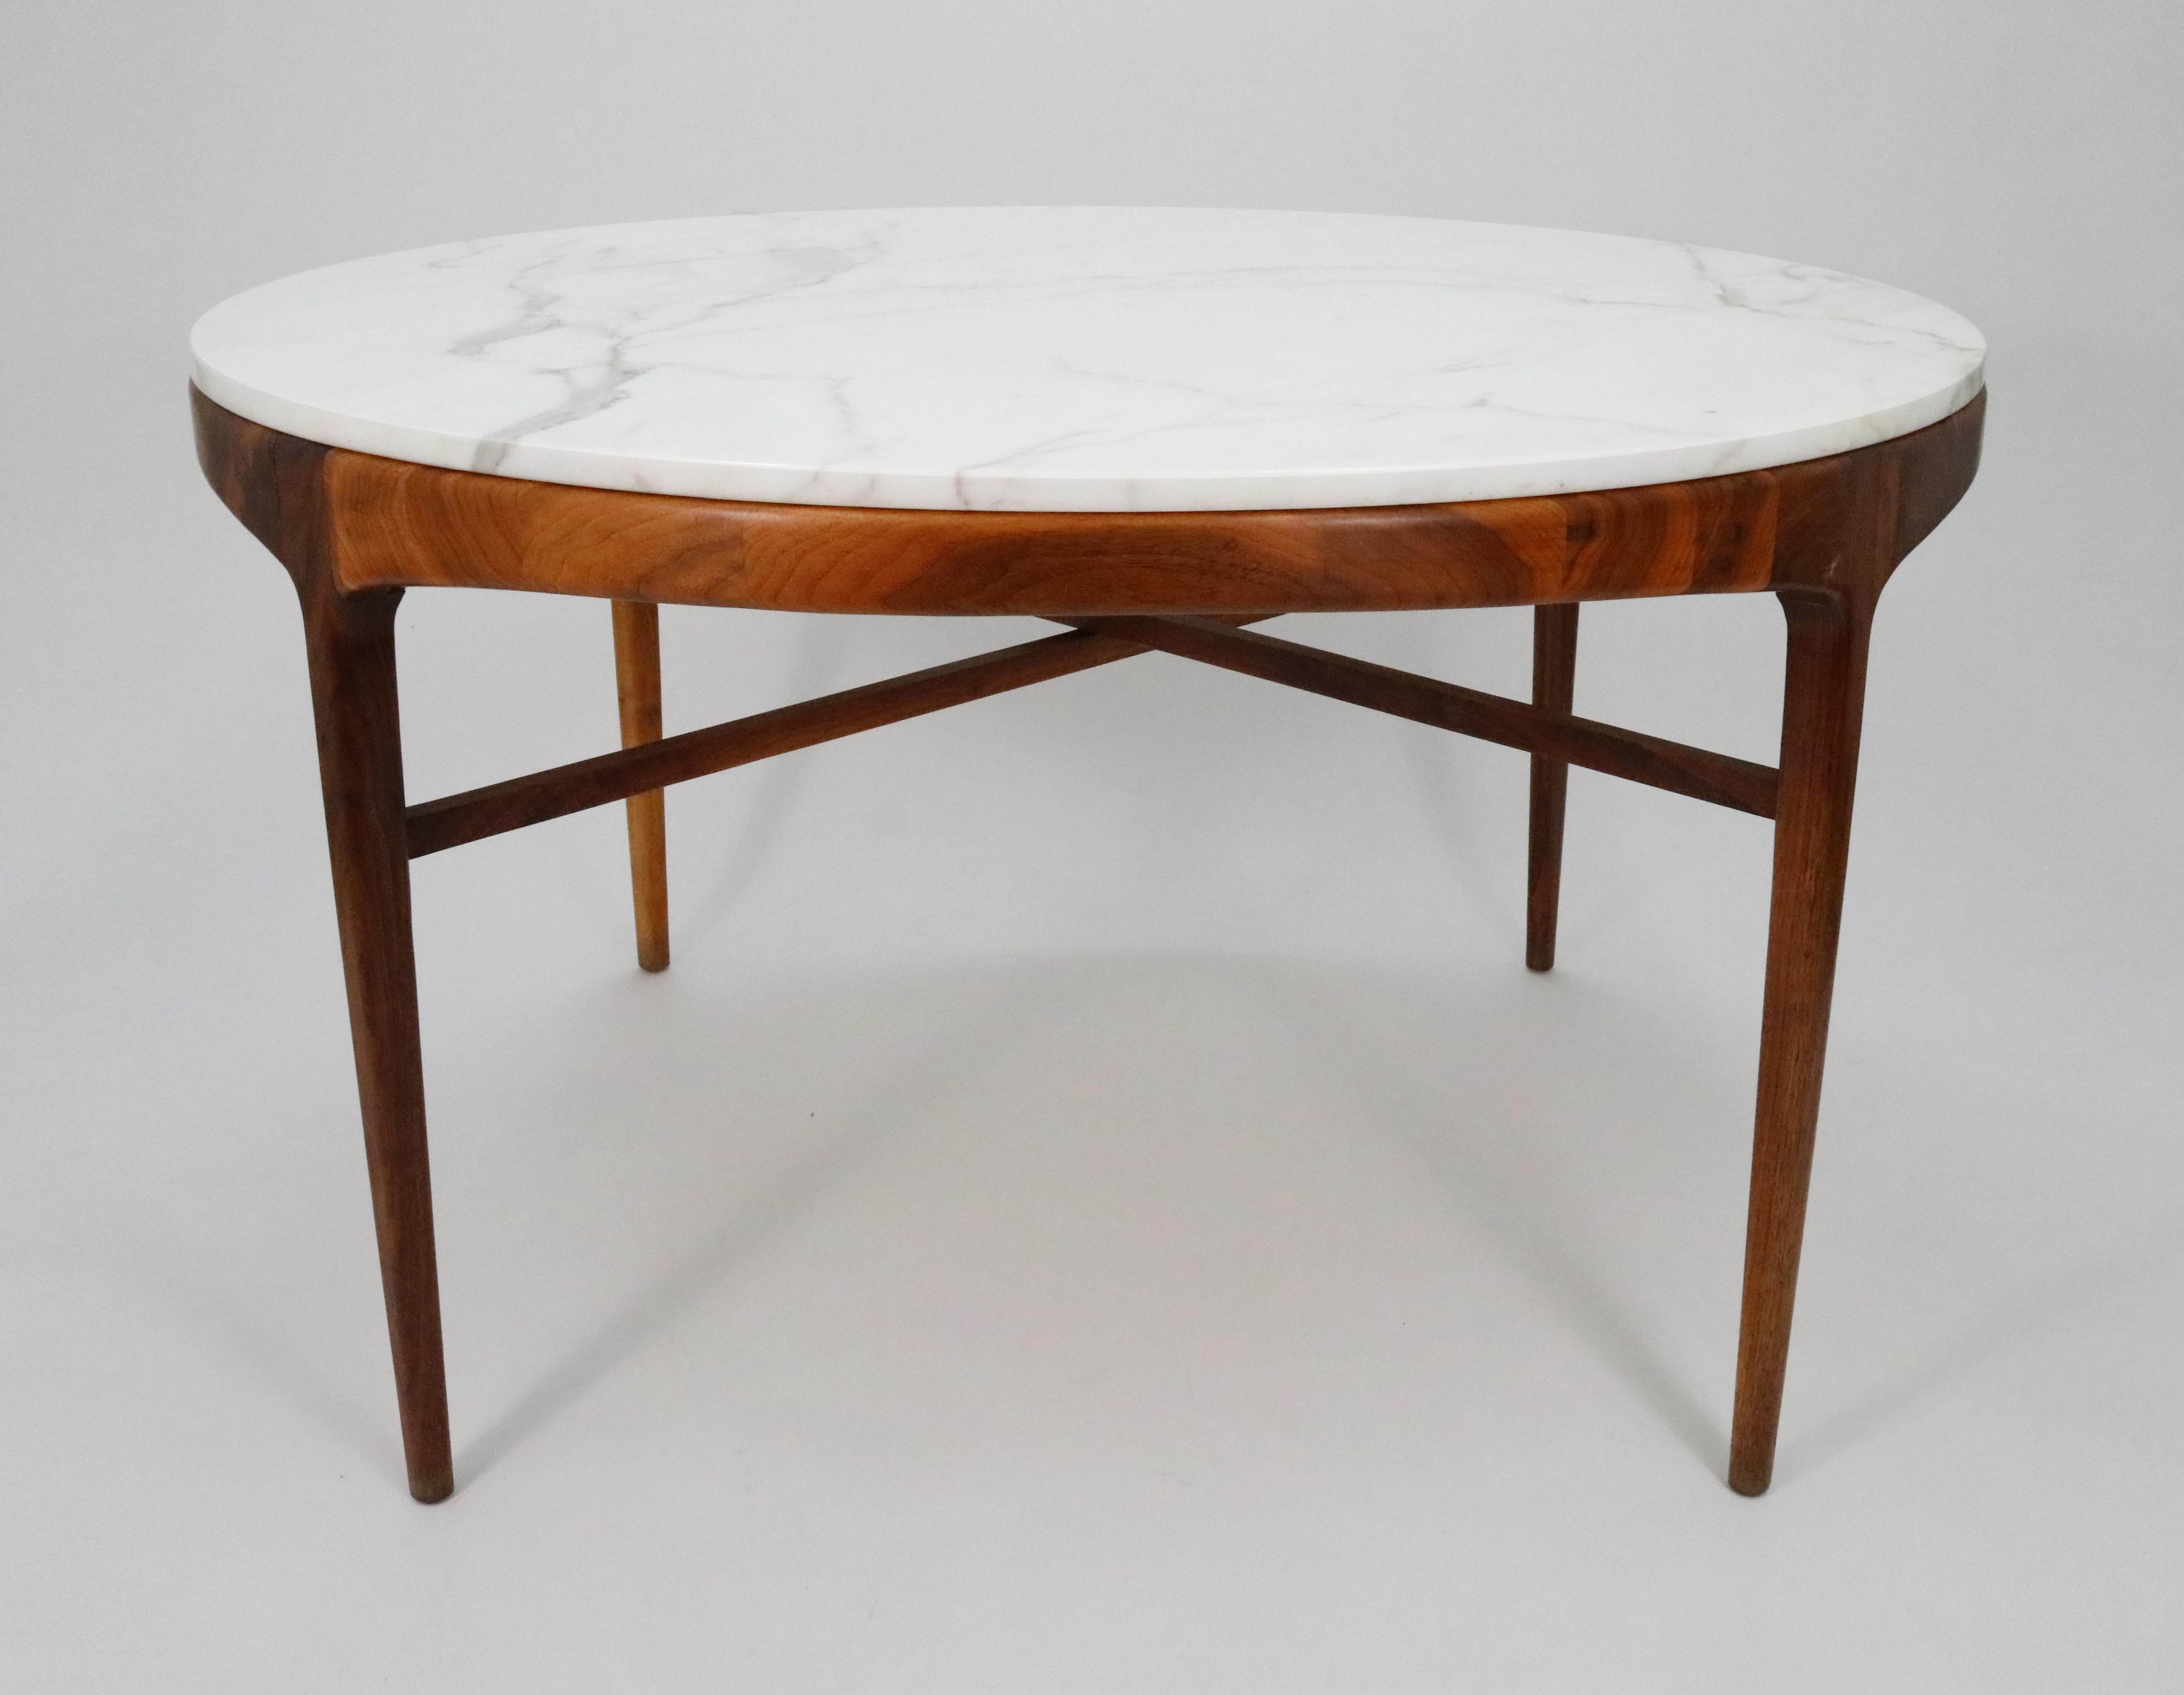 A rare Carrara marble and walnut dining table for Lane's 'Rhythm' series. 

Custom ordered for the sole previous owner by the Denver Design Center in the mid-1960s.

This beautiful edition is perfectly made for intimate dinners - or maybe even a